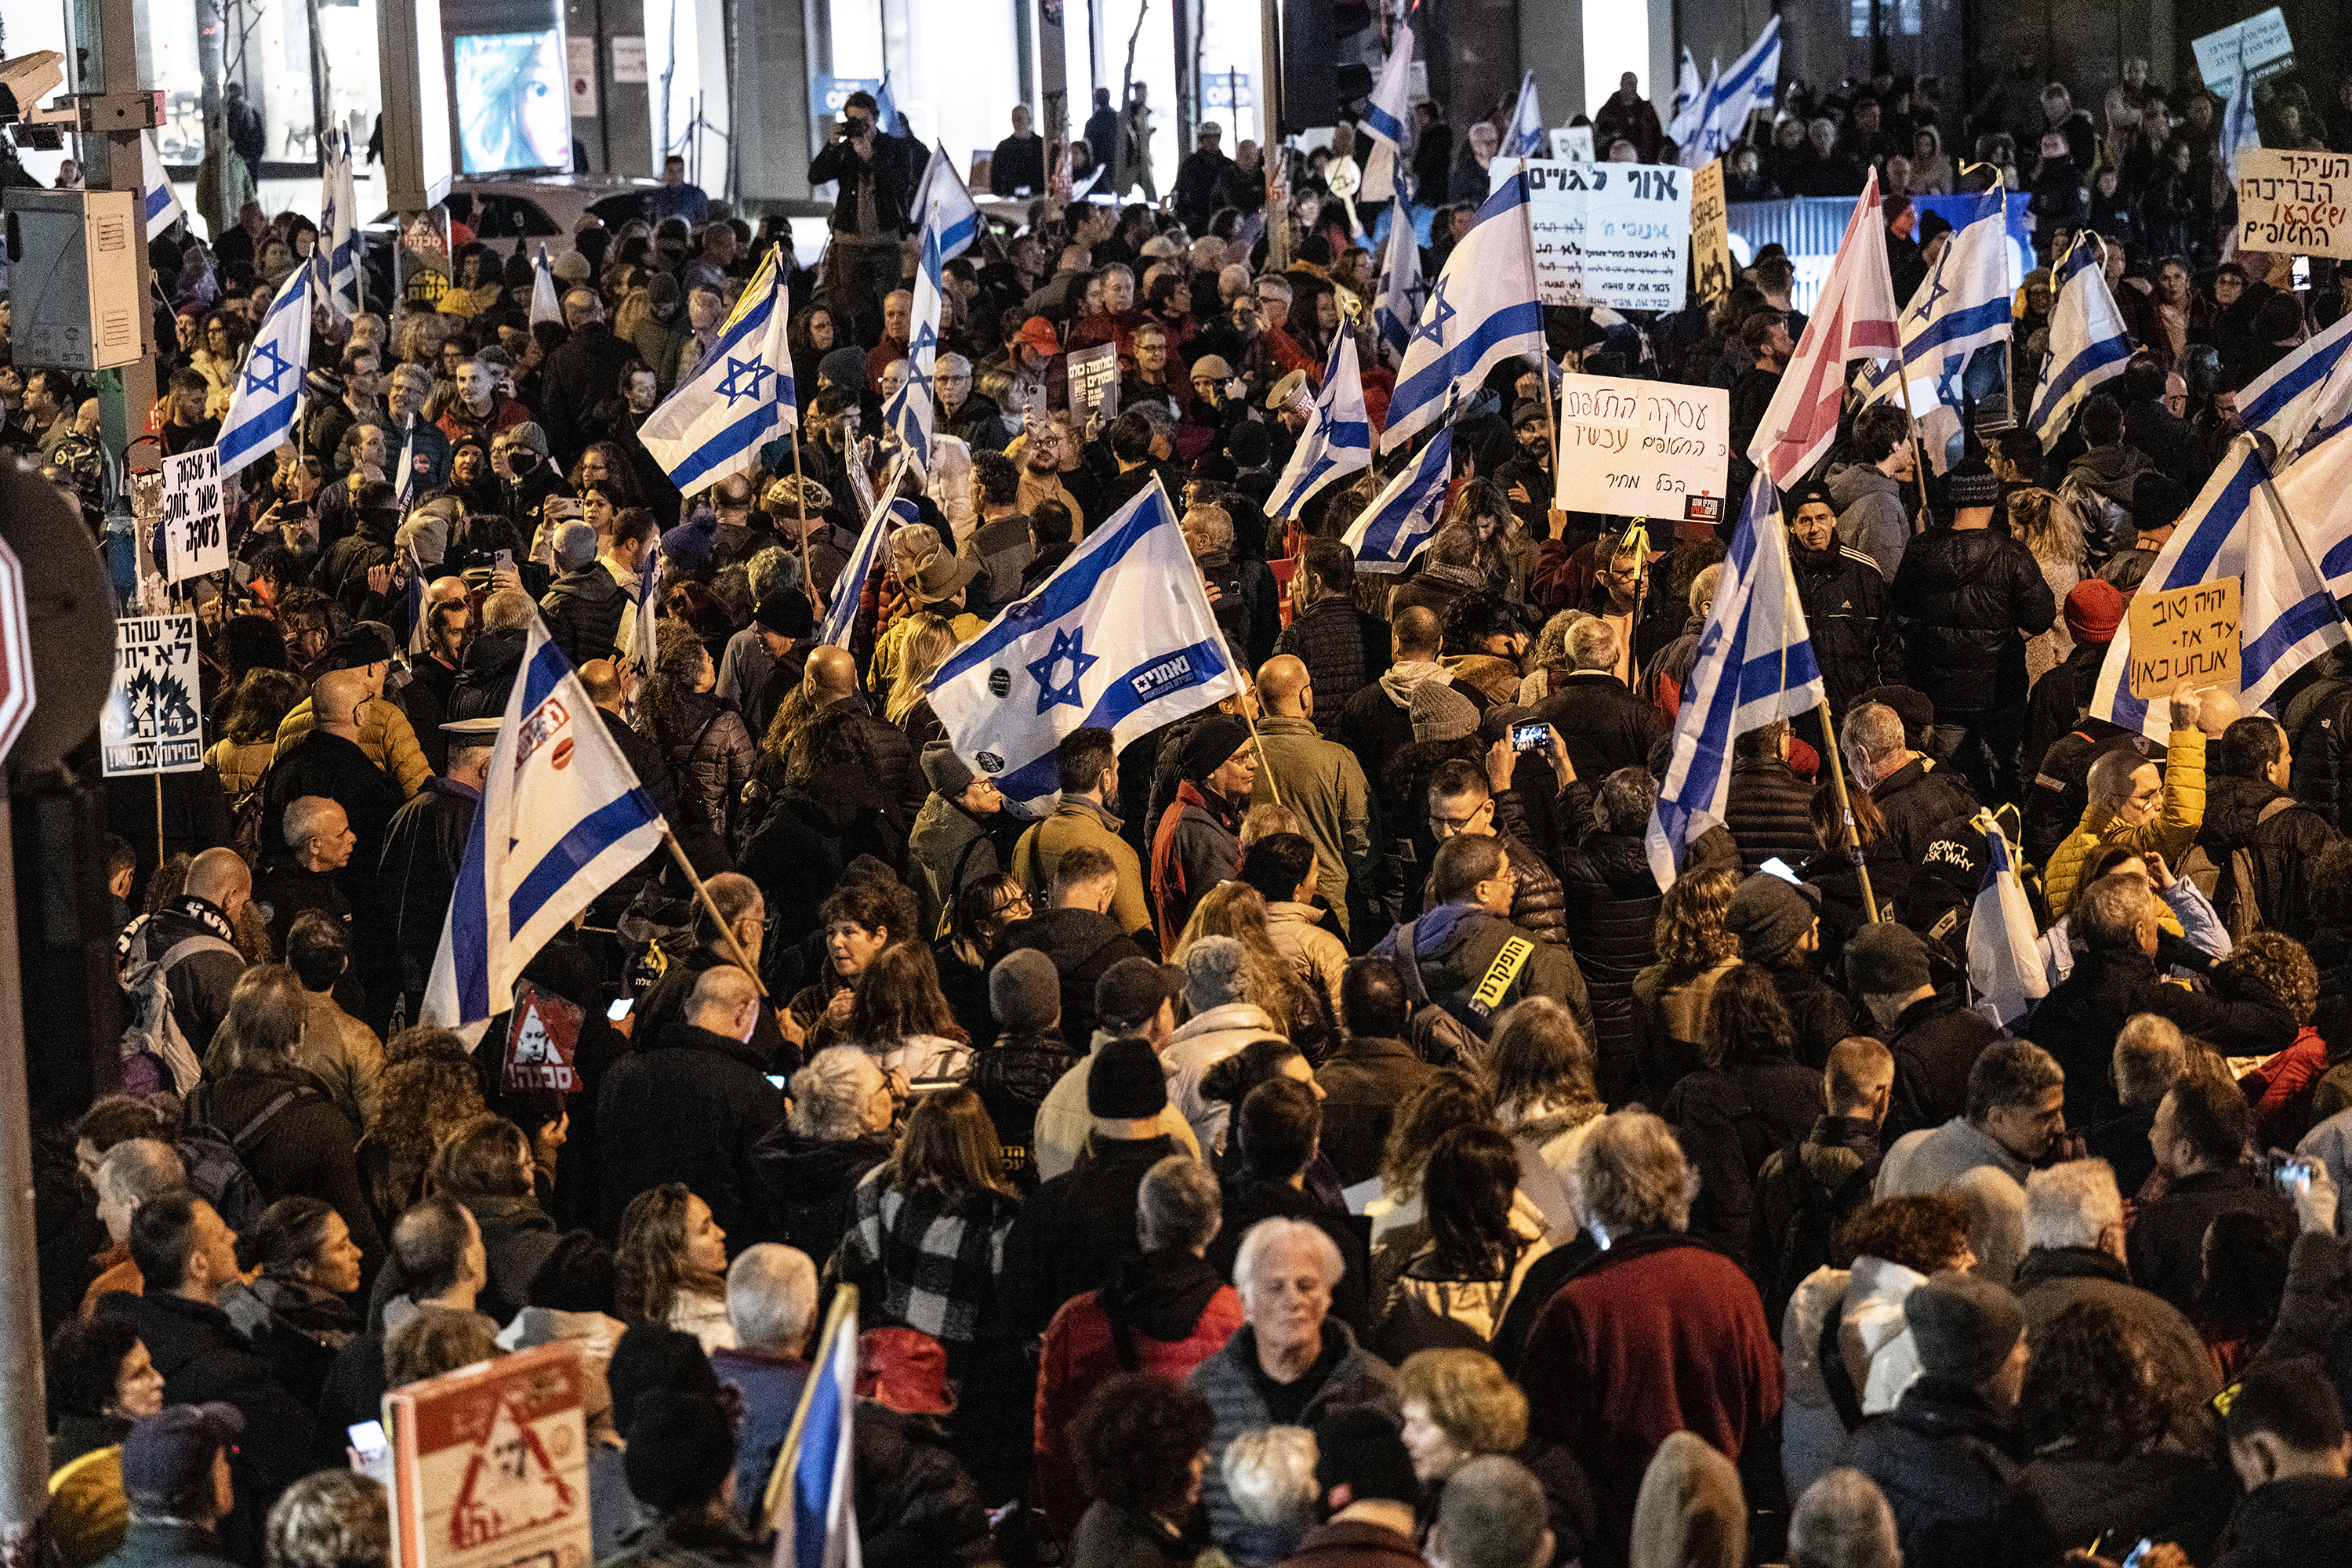 Protesters gather to stage a demonstration demanding the resignation of the government and the holding of early elections in Tel Aviv, Israel on February 3.